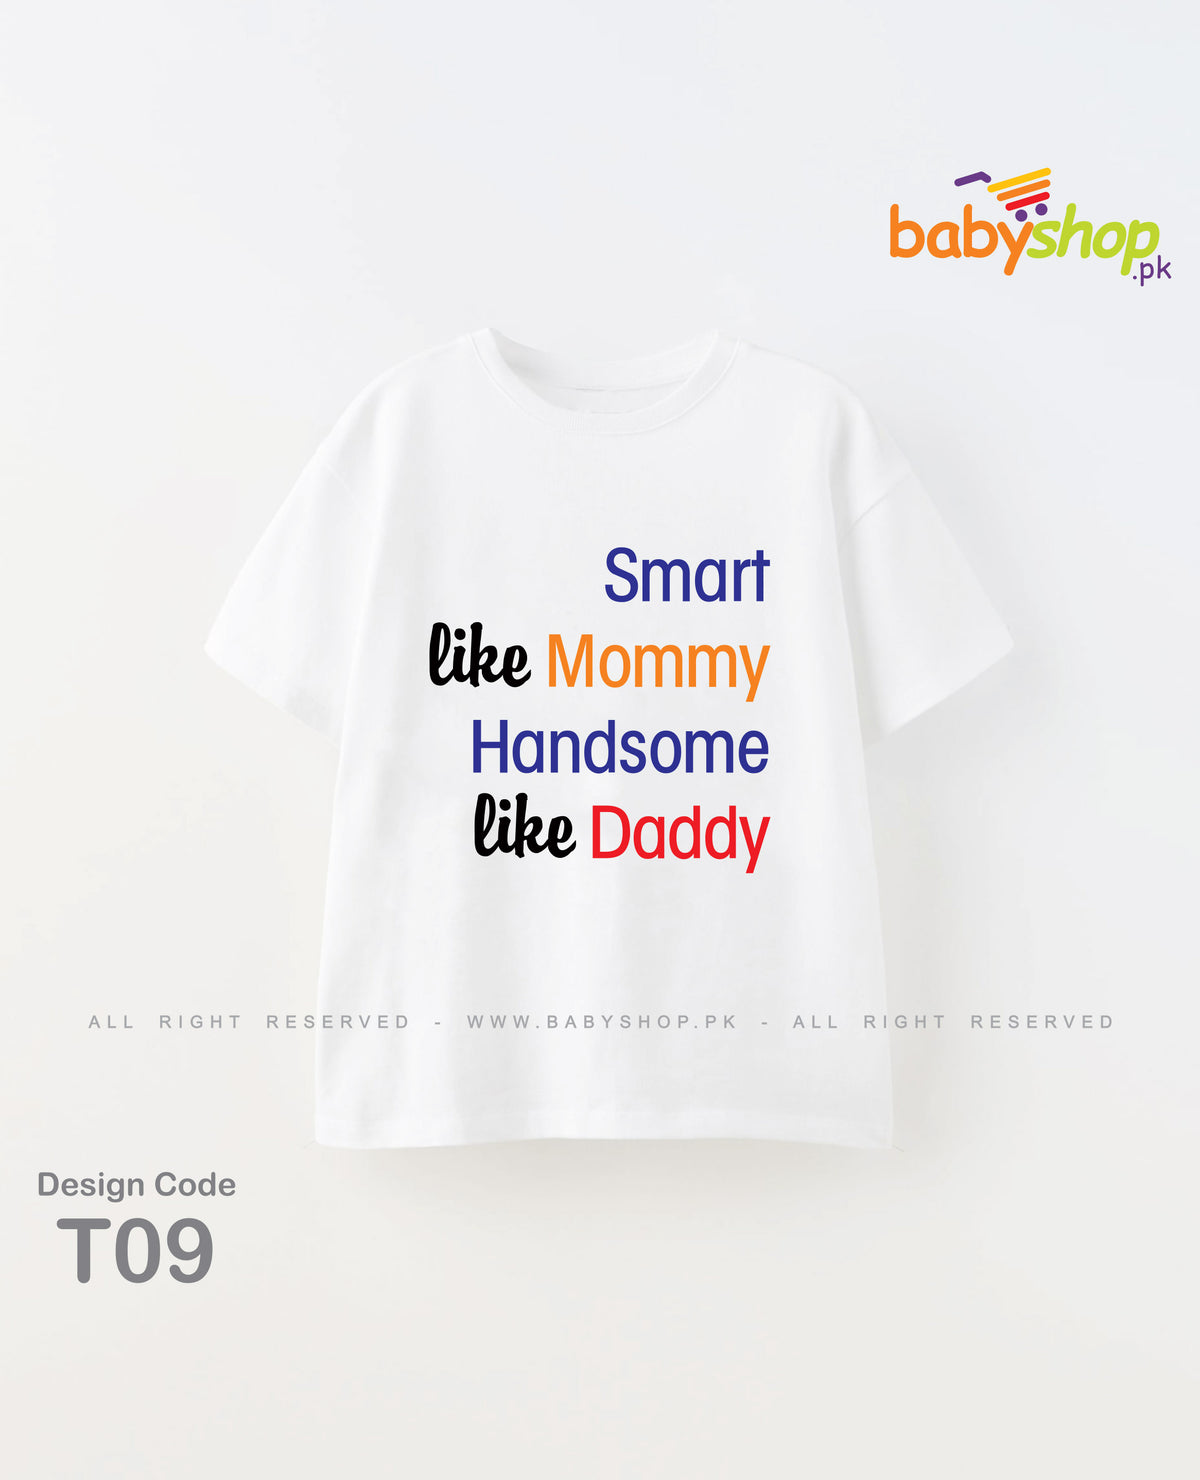 Smart like mommy handsome like daddy baby t shirt